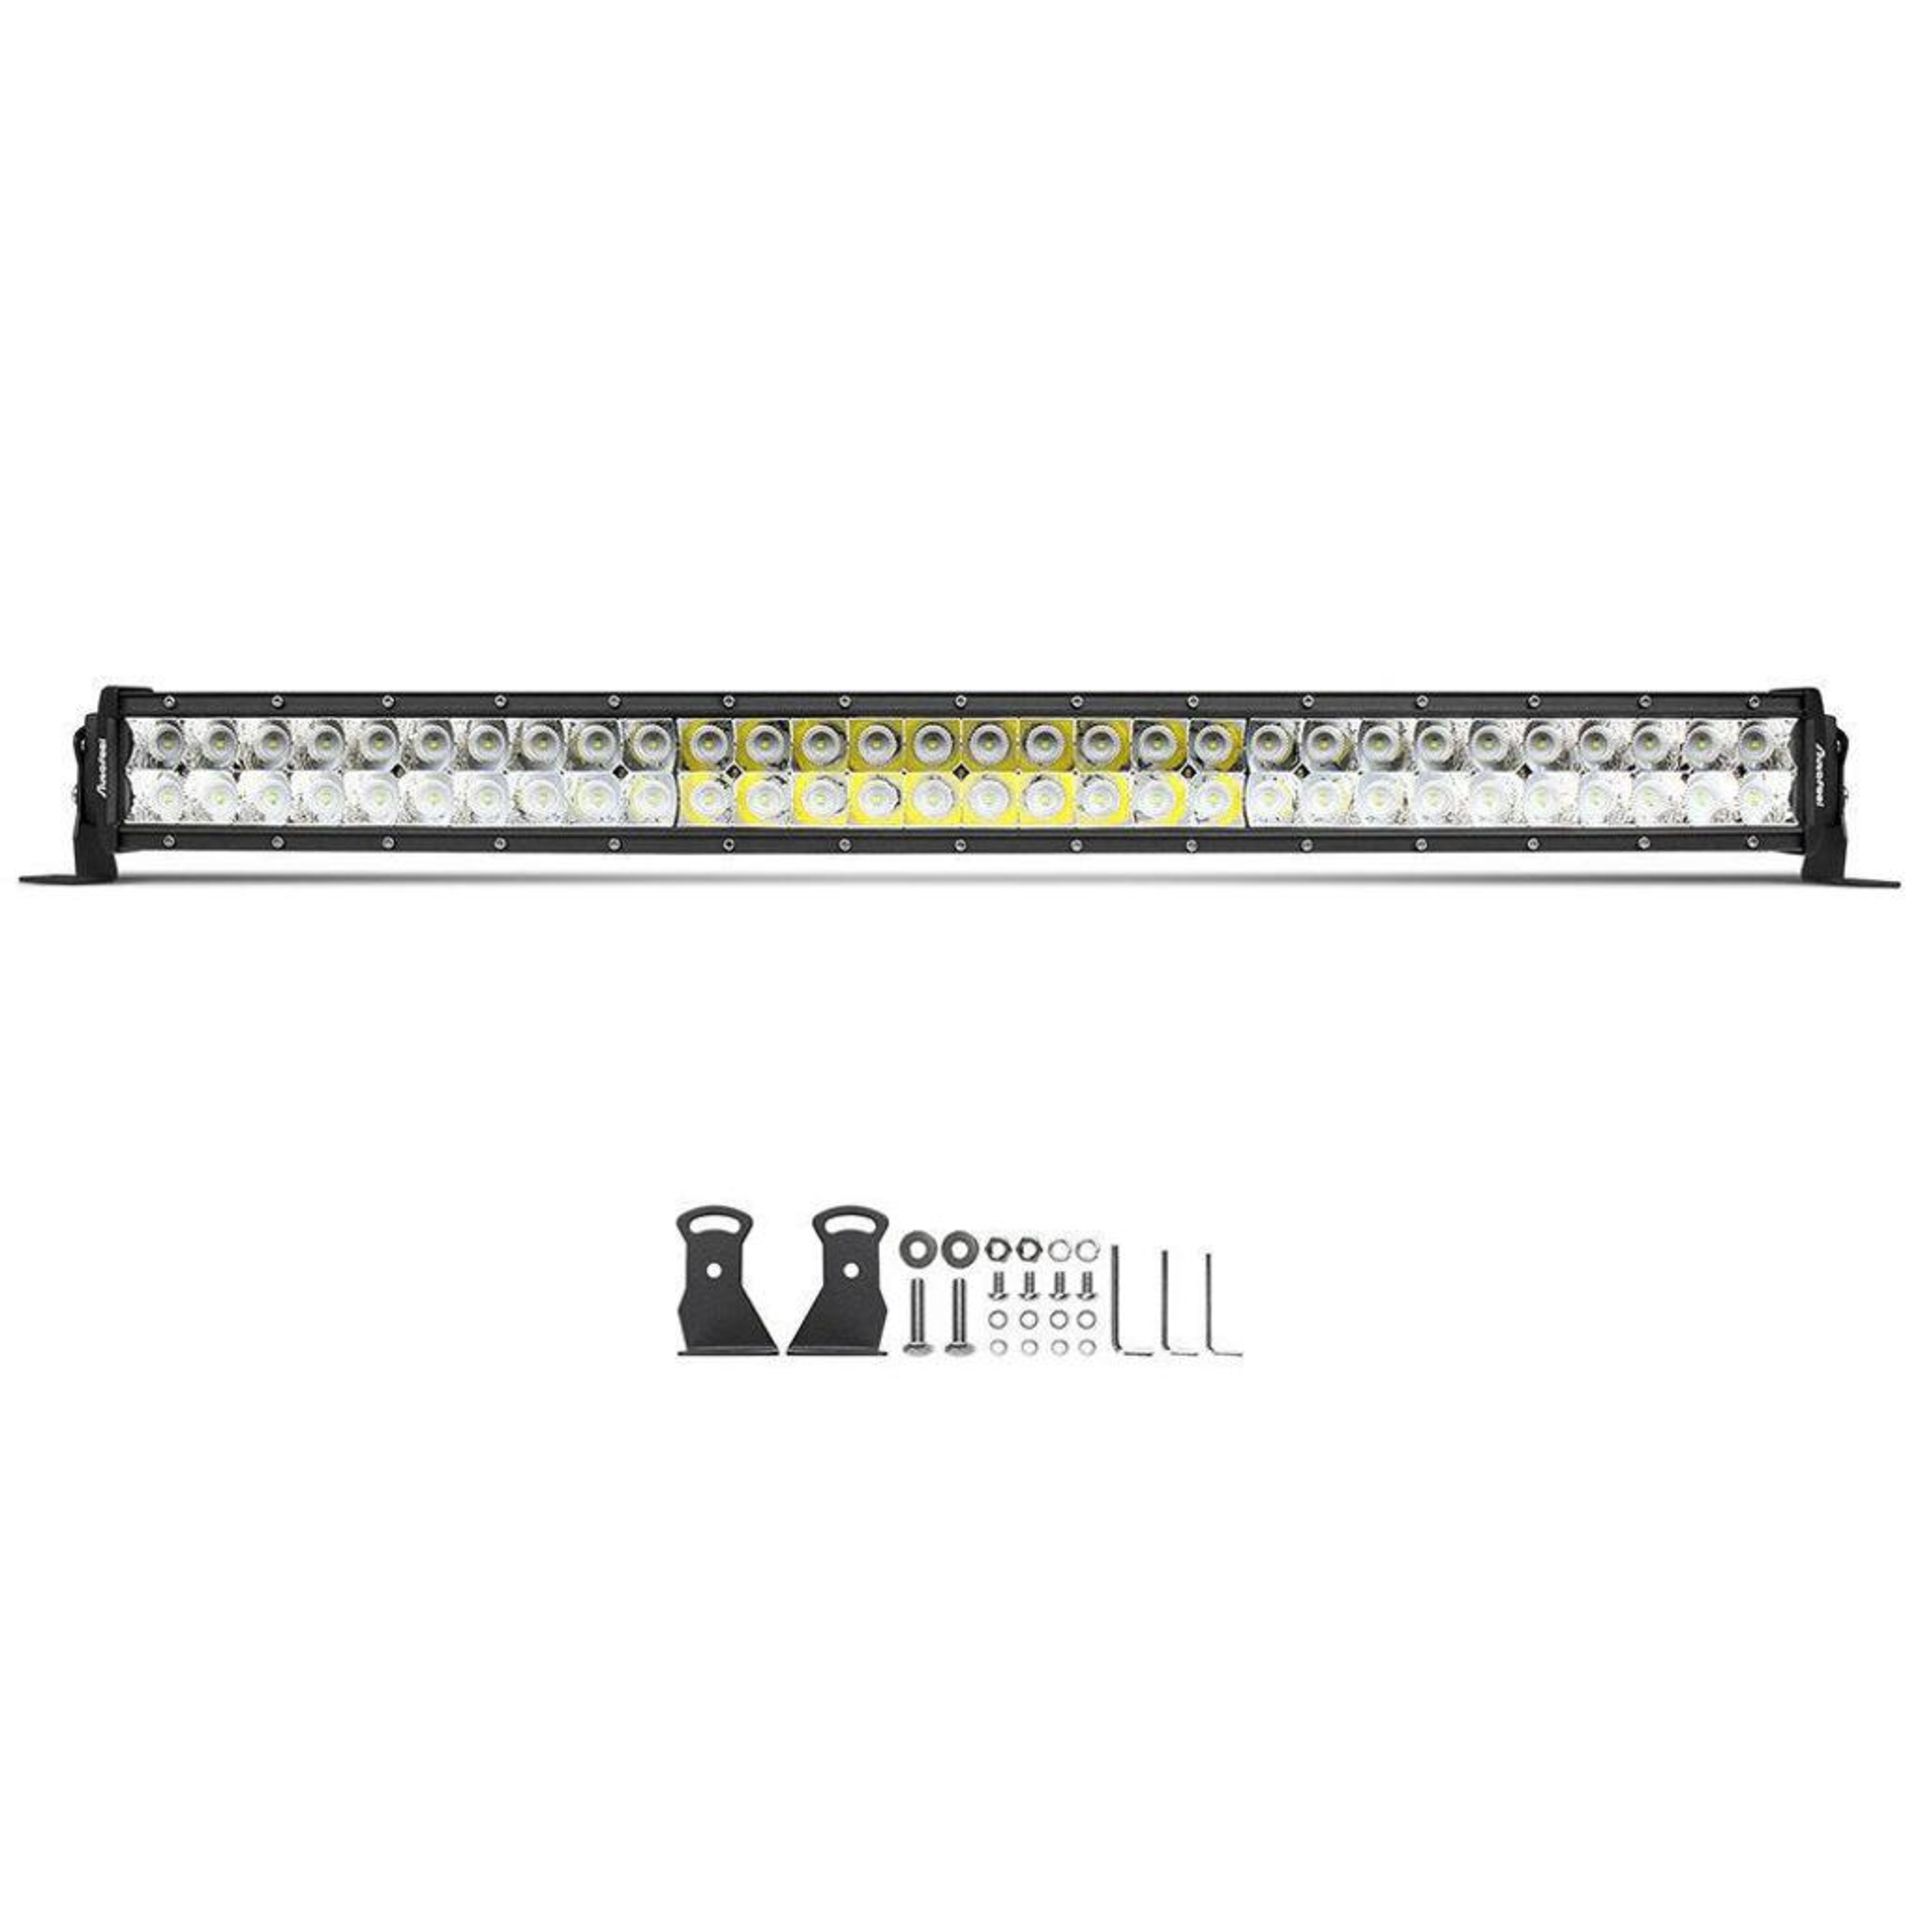 NEW 32" LED Curved Light Bar 420W, 63000LM - Image 5 of 5